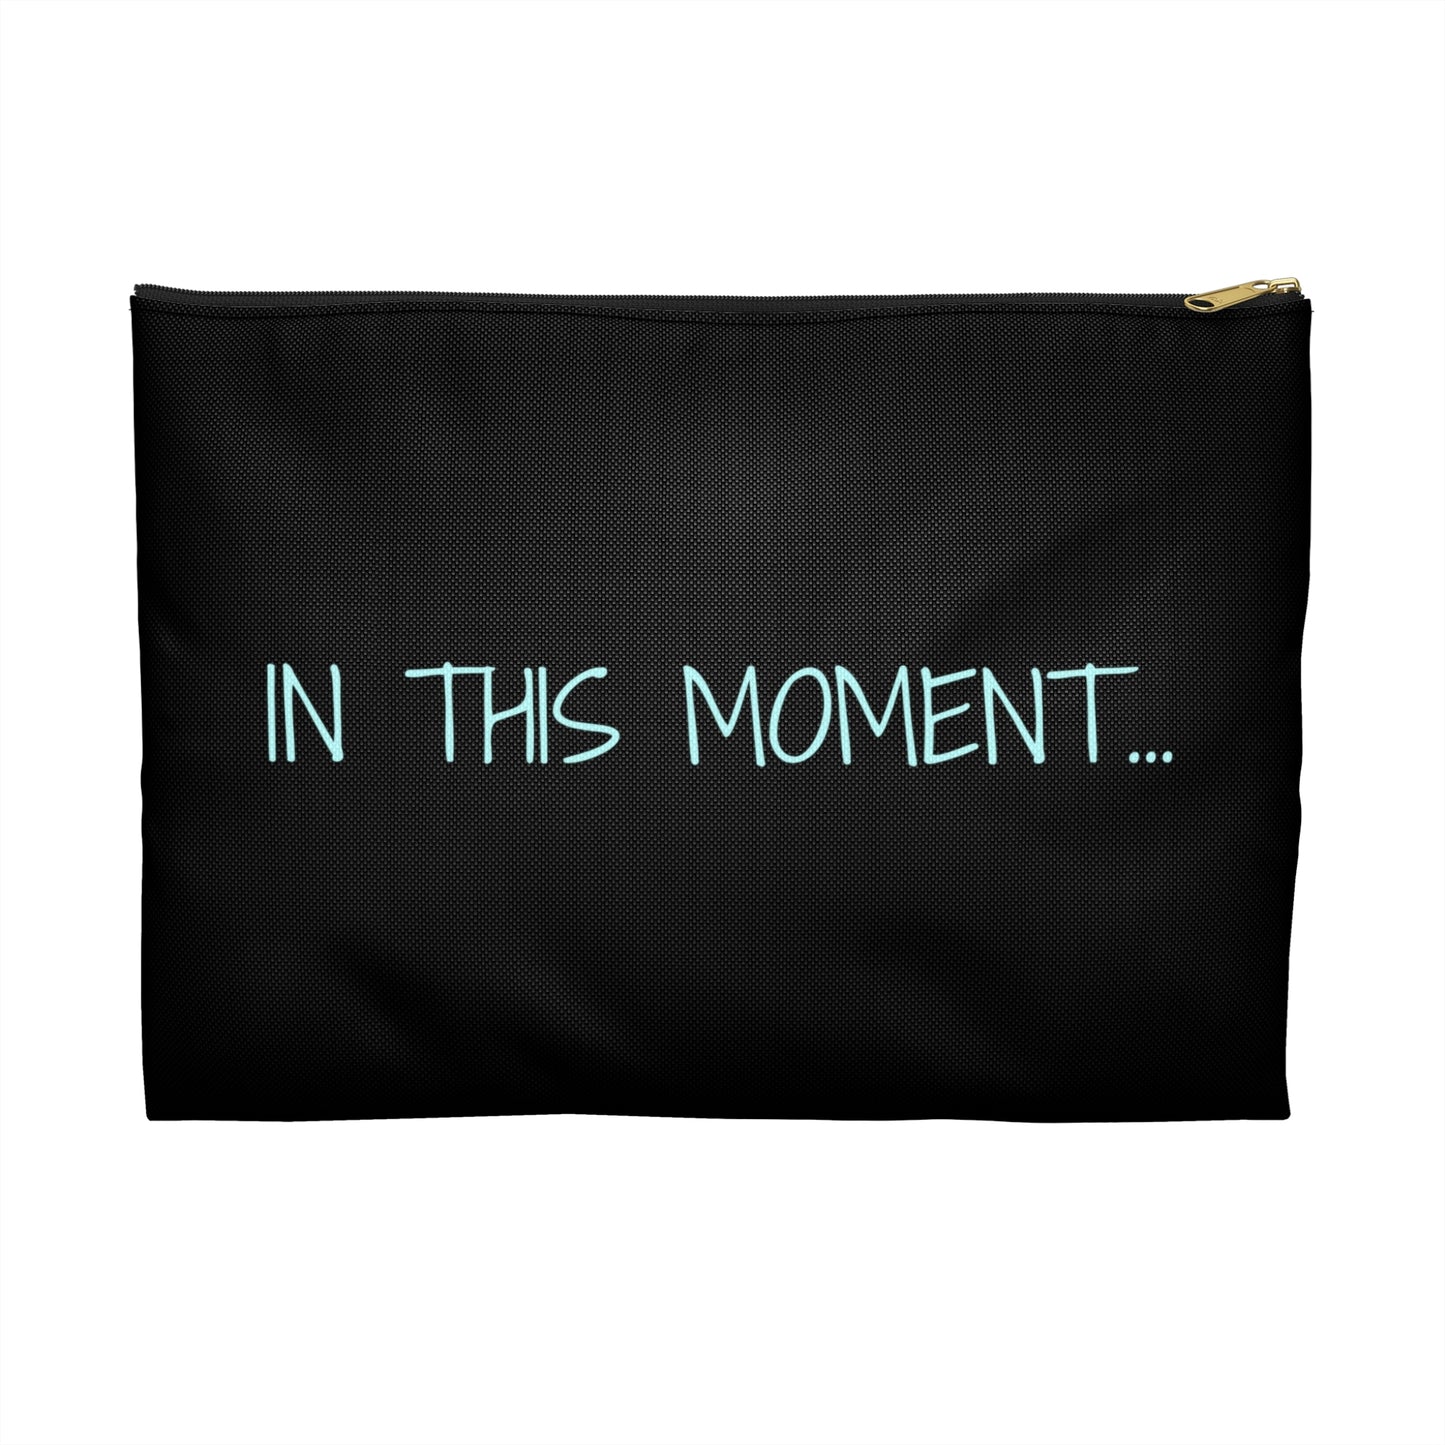 "IN THIS MOMENT I AM GROUNDED" Accessory Pouches